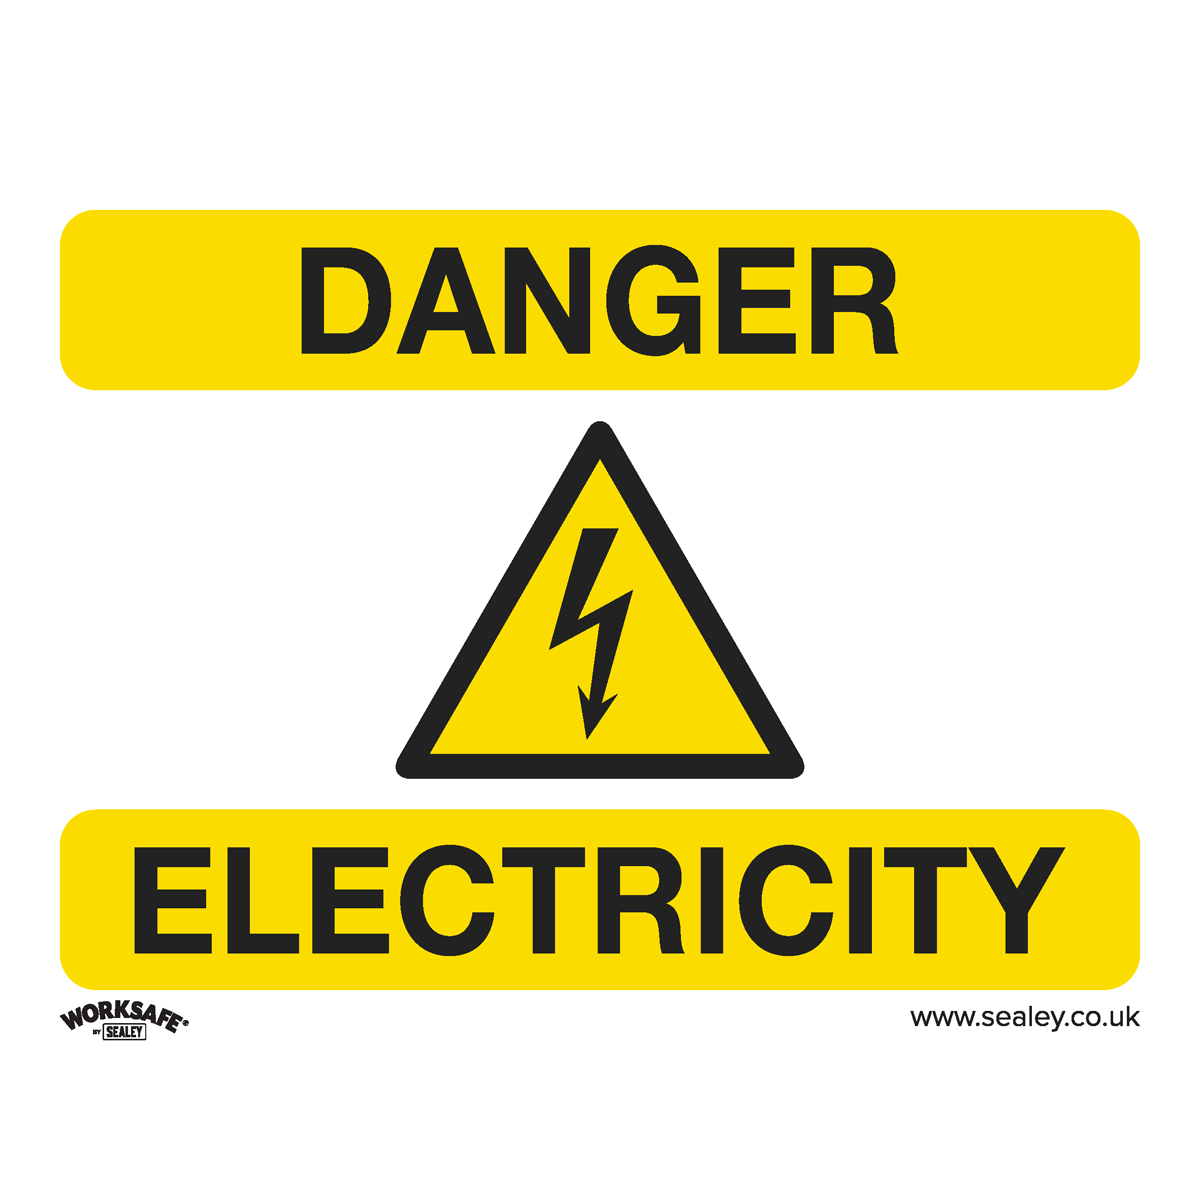 Warning Safety Sign - Danger Electricity - Rigid Plastic - SS41P1 - Farming Parts